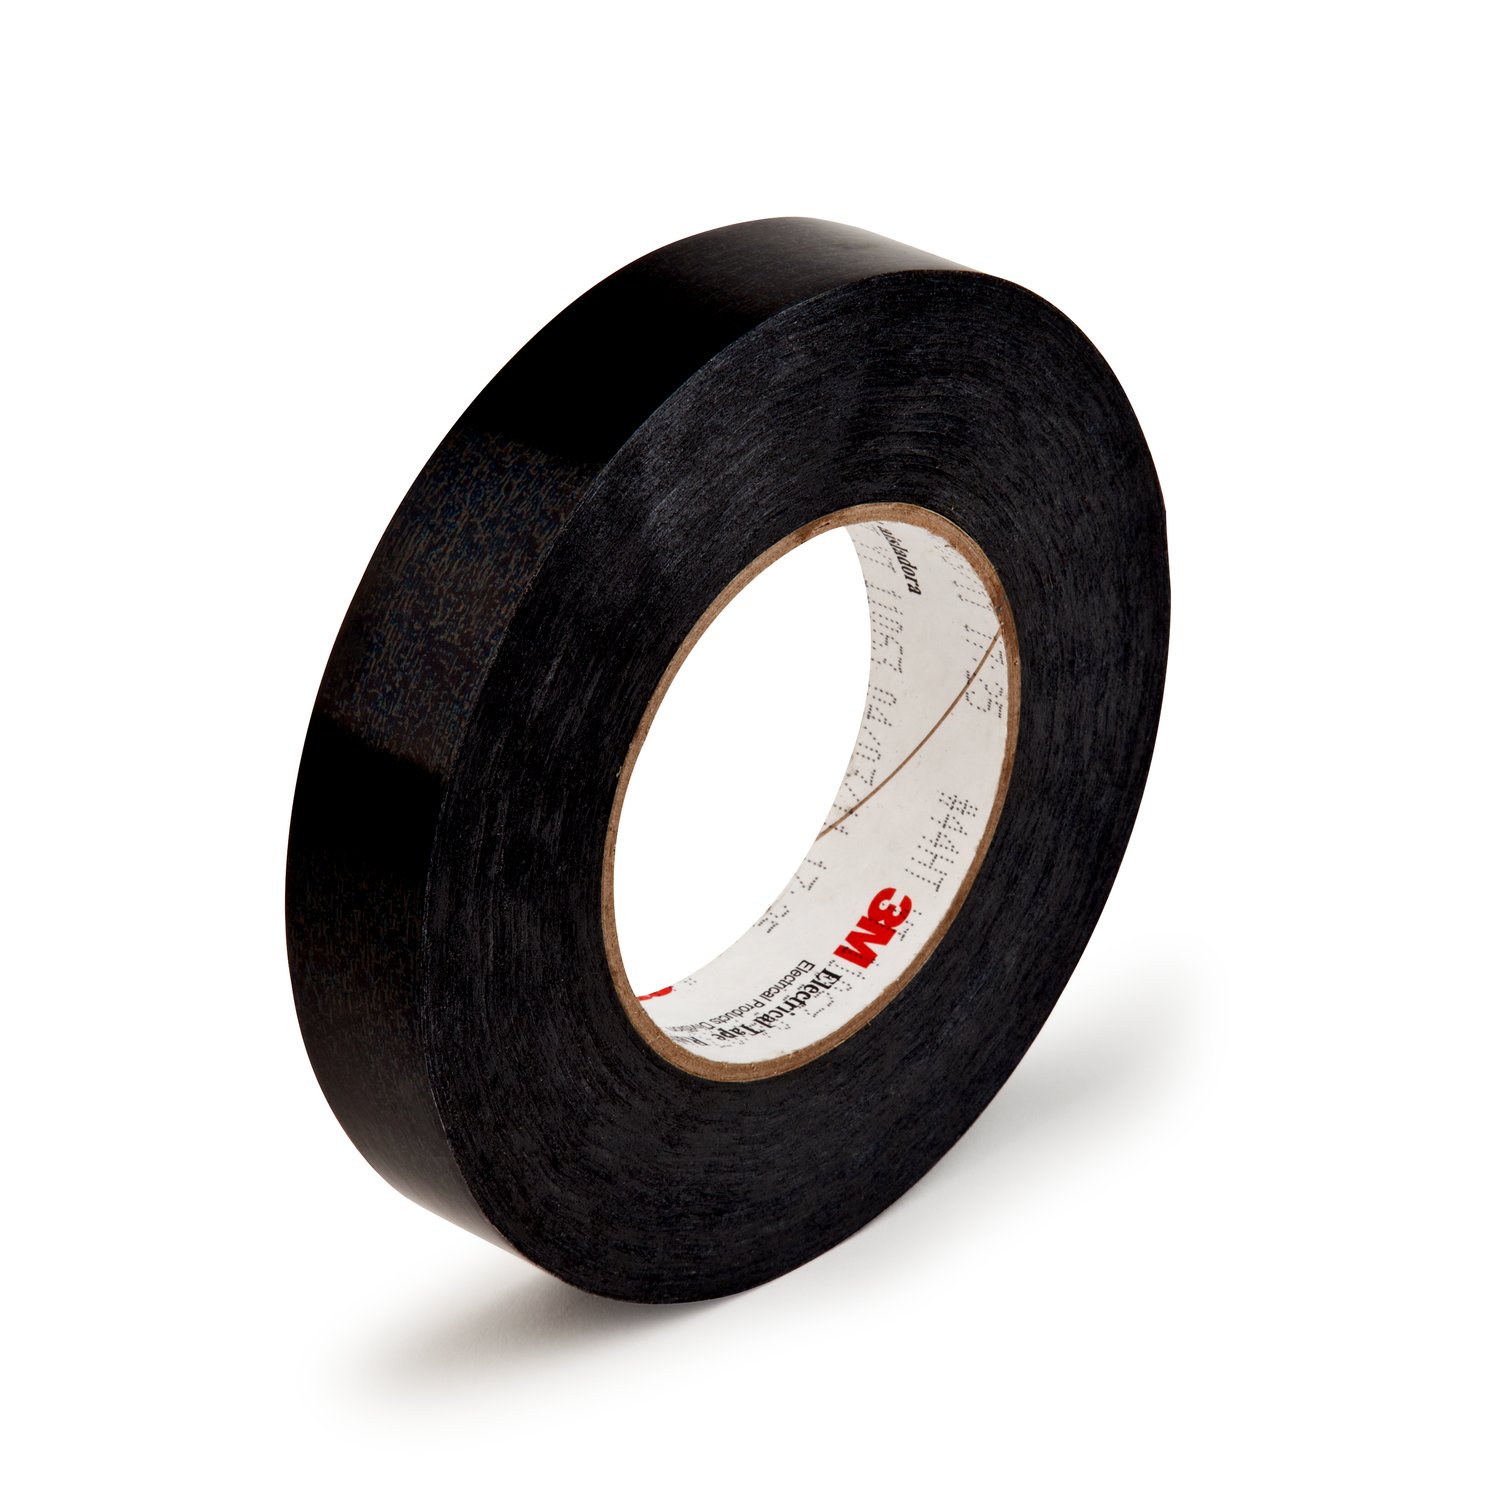 7010320794 - 3M Composite Film Electrical Tape 44HT, 23.5 in x 90 yd, plastic core,
1 Roll/Case